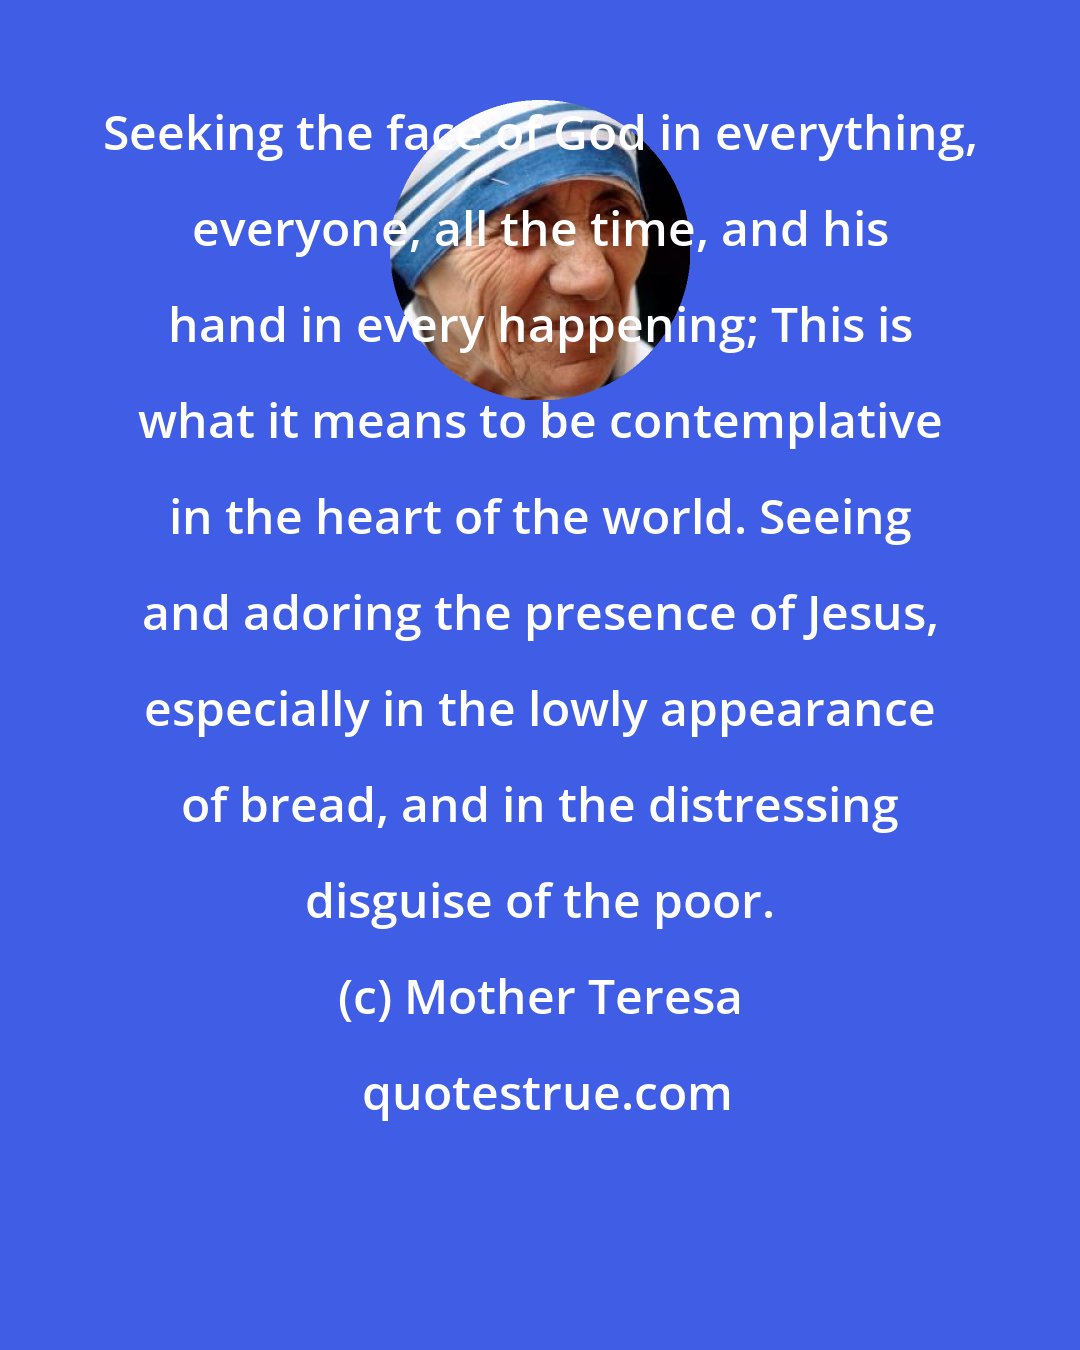 Mother Teresa: Seeking the face of God in everything, everyone, all the time, and his hand in every happening; This is what it means to be contemplative in the heart of the world. Seeing and adoring the presence of Jesus, especially in the lowly appearance of bread, and in the distressing disguise of the poor.